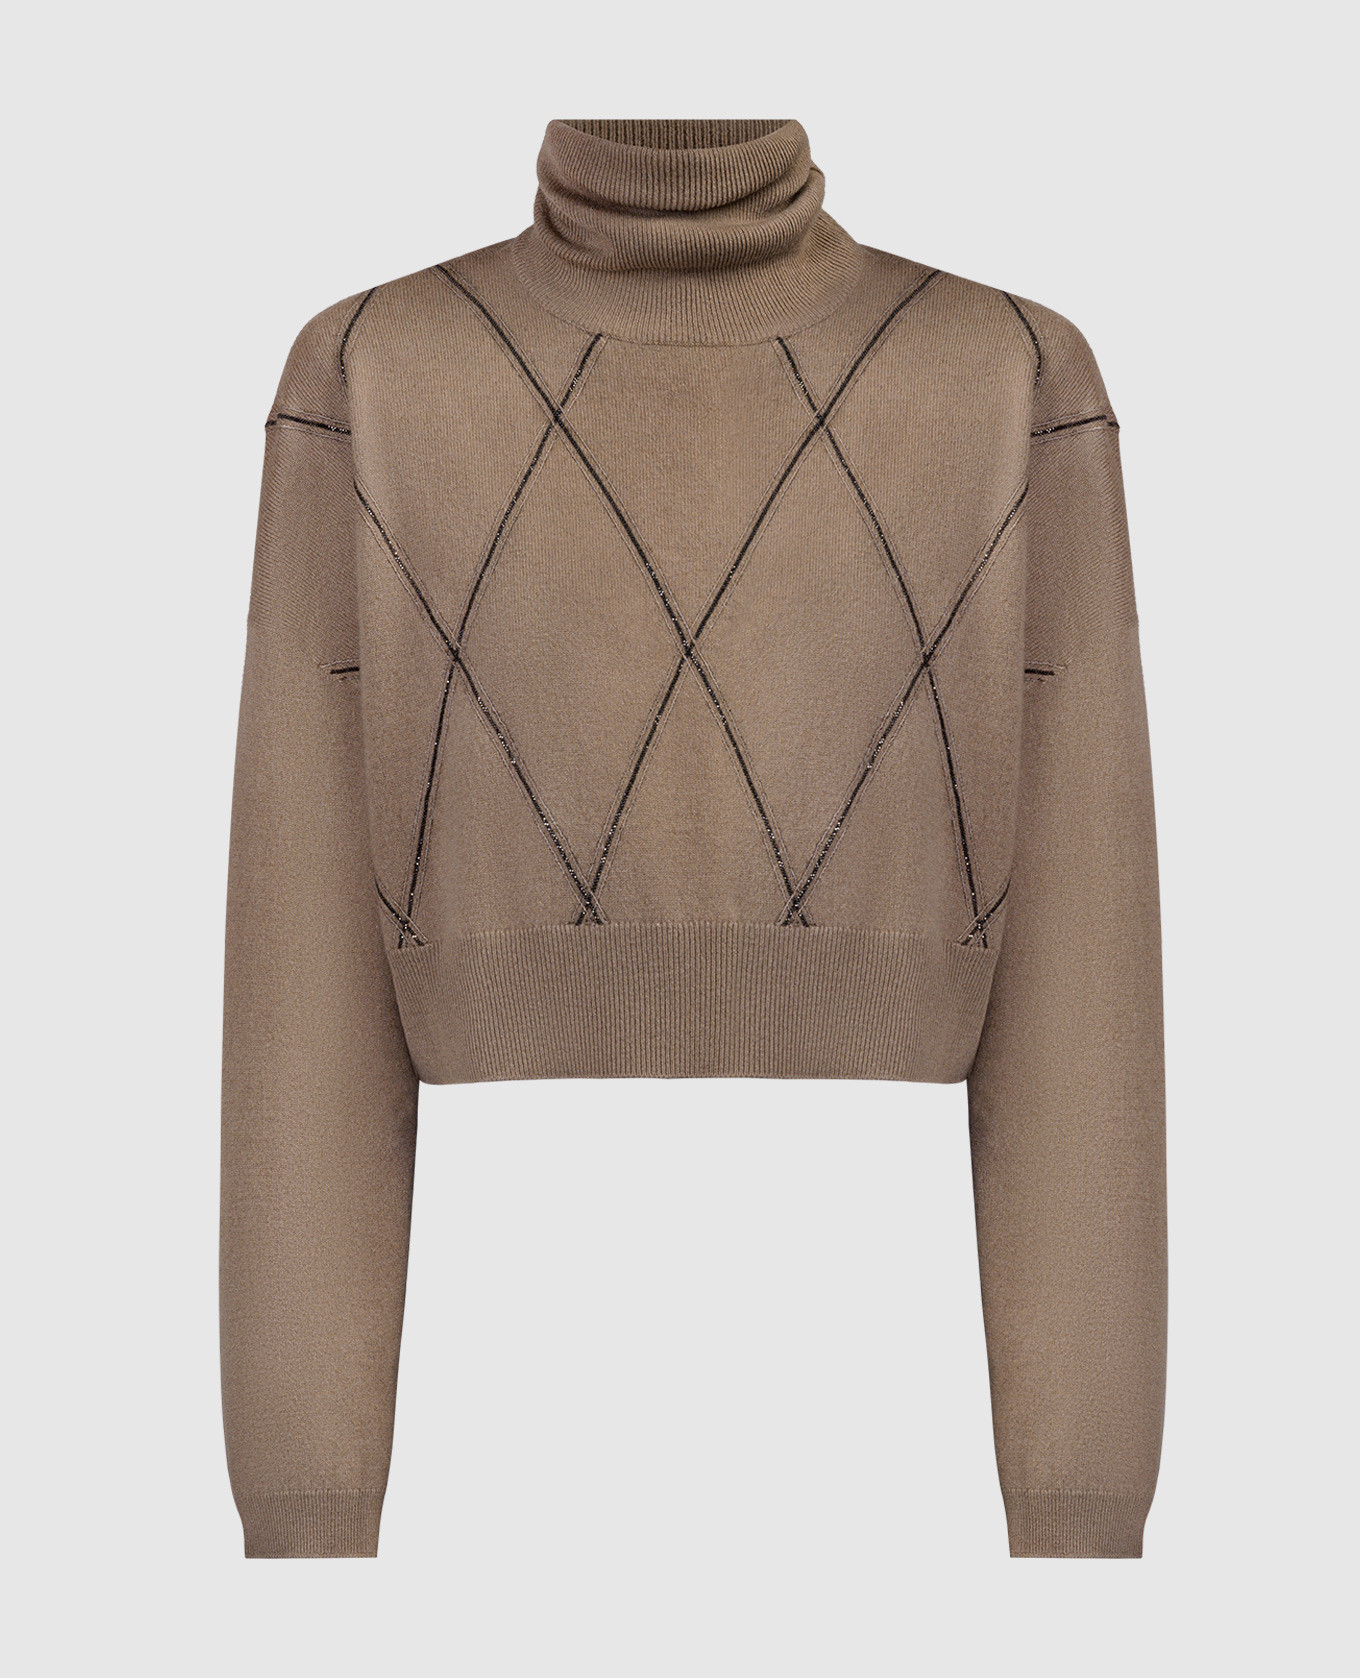 Brown sweater in a geometric pattern with a monil chain made of ecolathoon